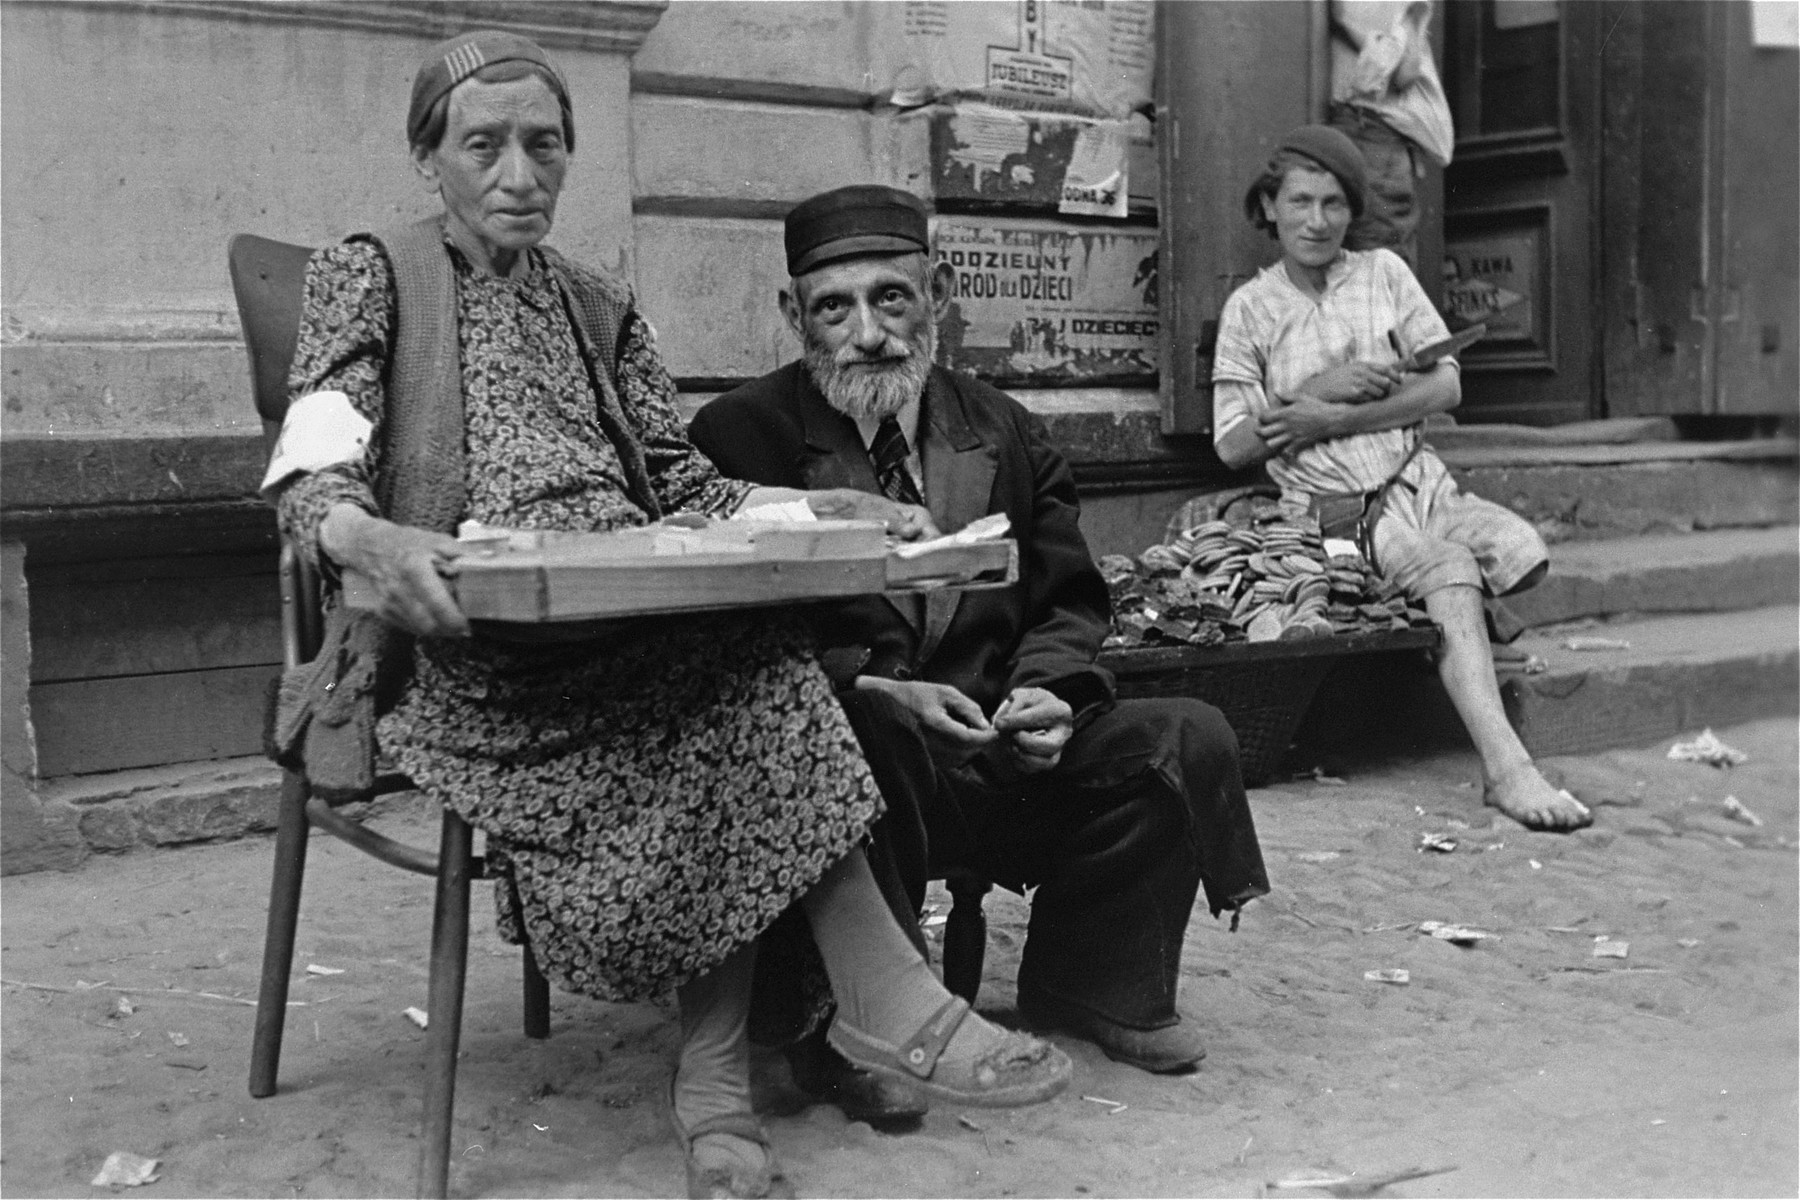 An elderly couple sells goods on the street in the Warsaw ghetto.